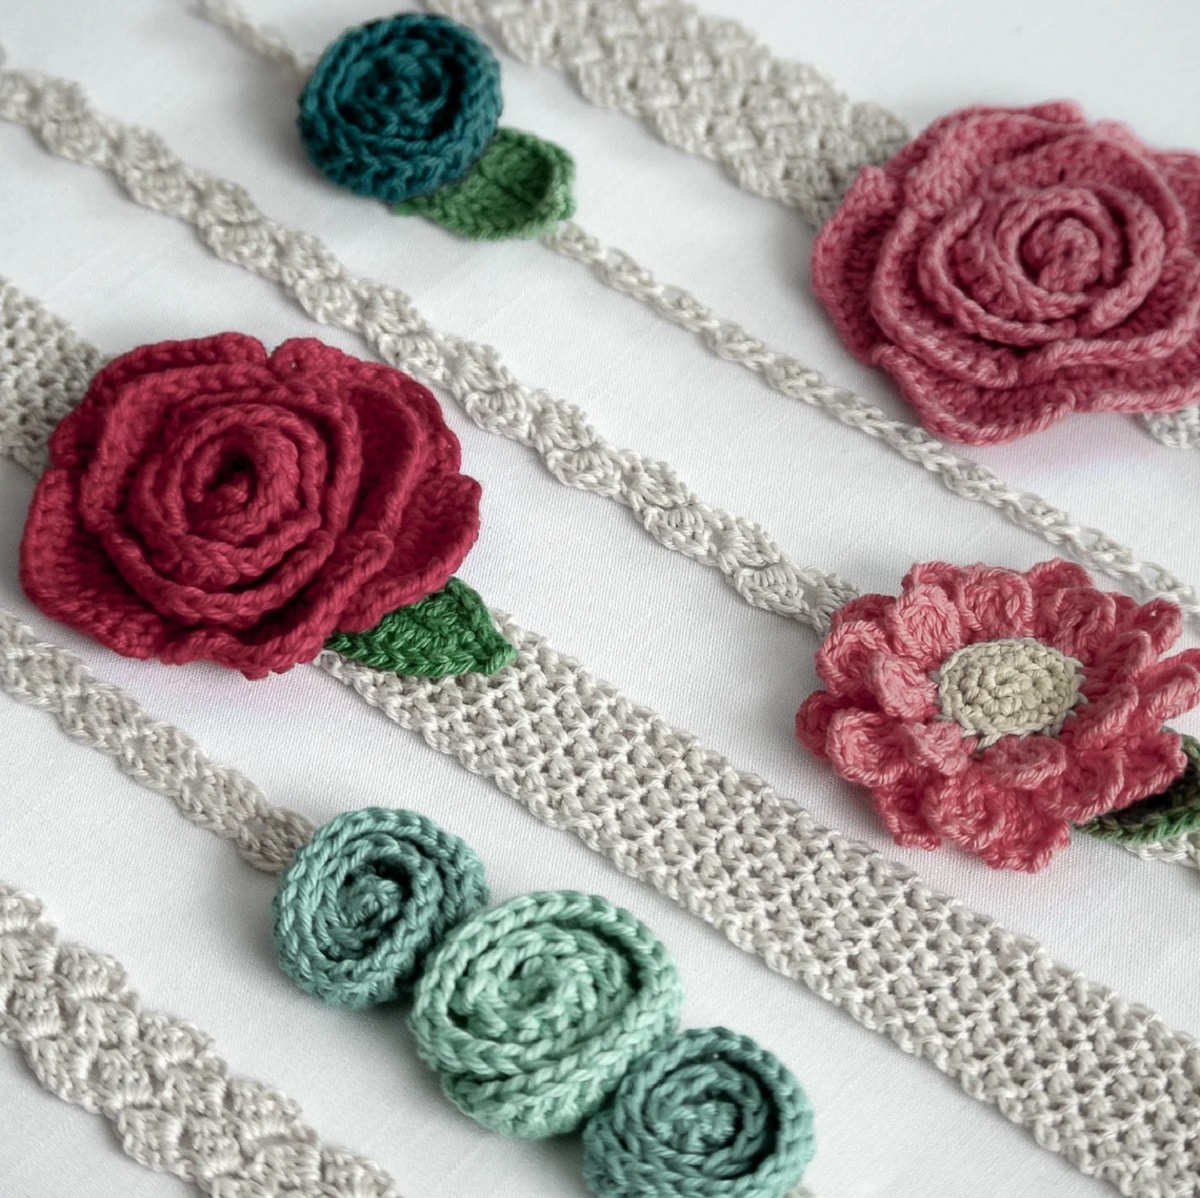 White crochet headbands with a braided design with pink roses, flowers, and small blue knots on them laid across a white background.